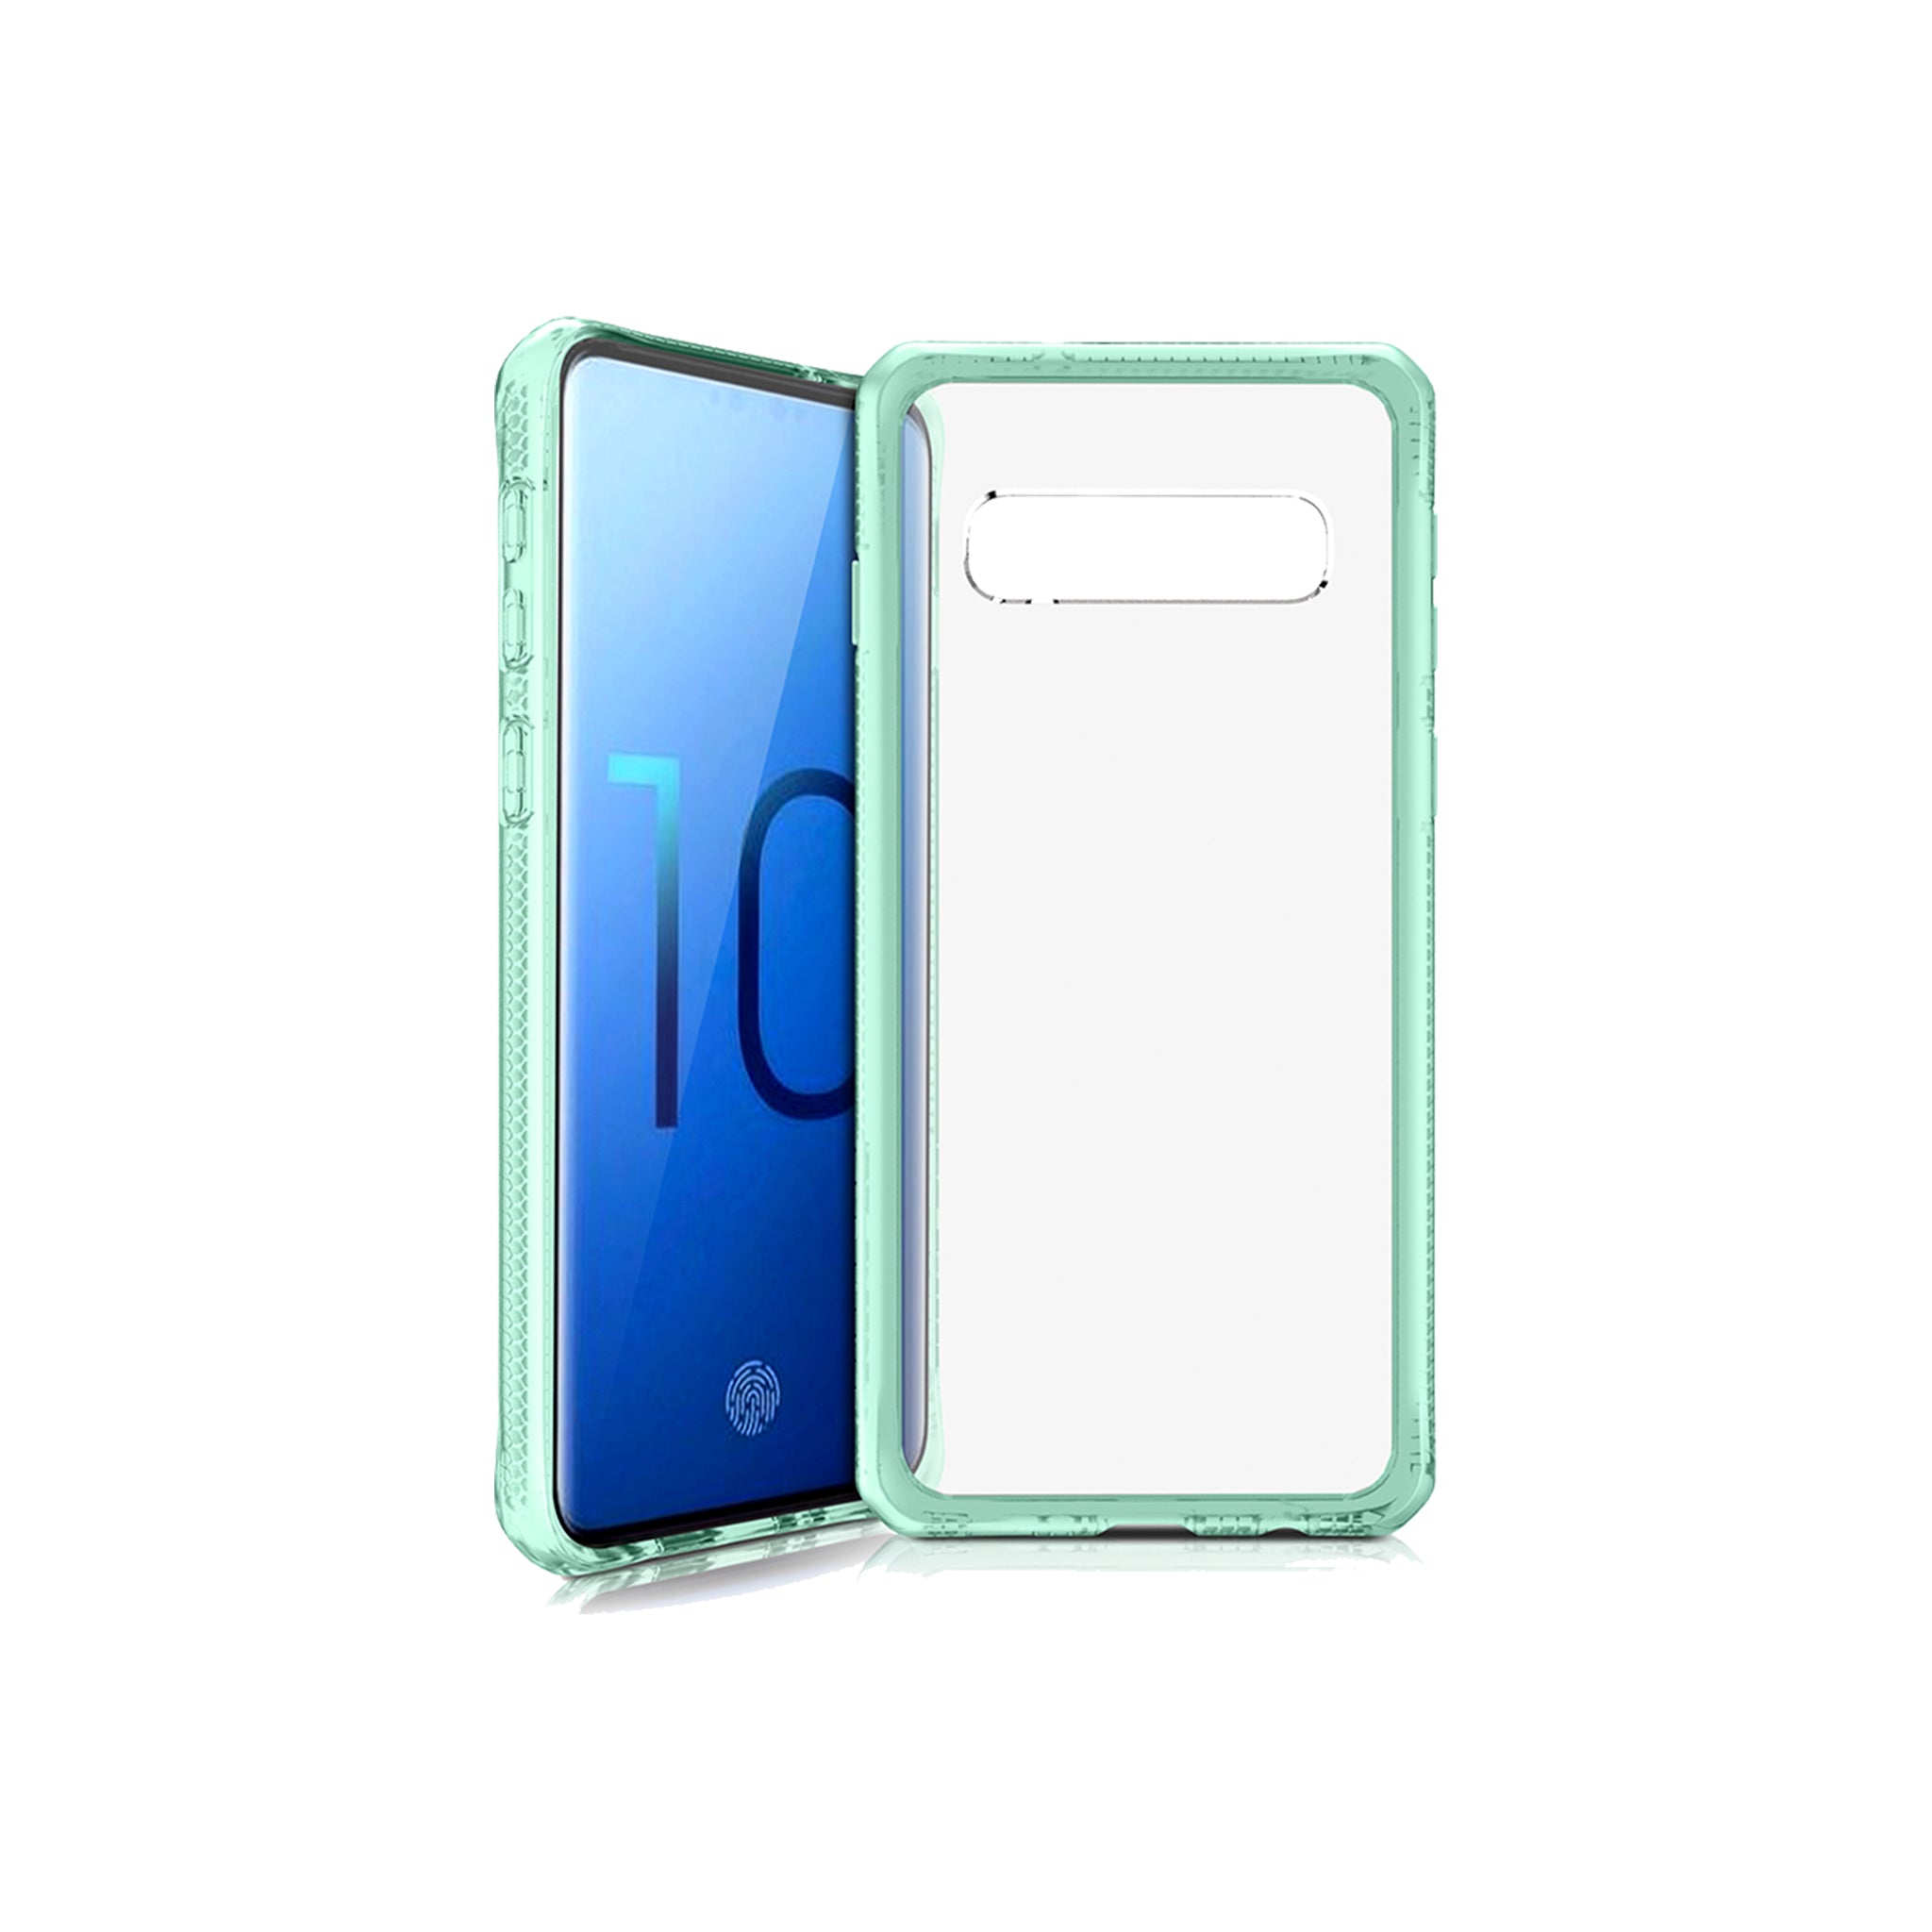 Itskins - Hybrid Frost Mkii Case For Samsung Galaxy S10 - Tiffany Green And Transparent